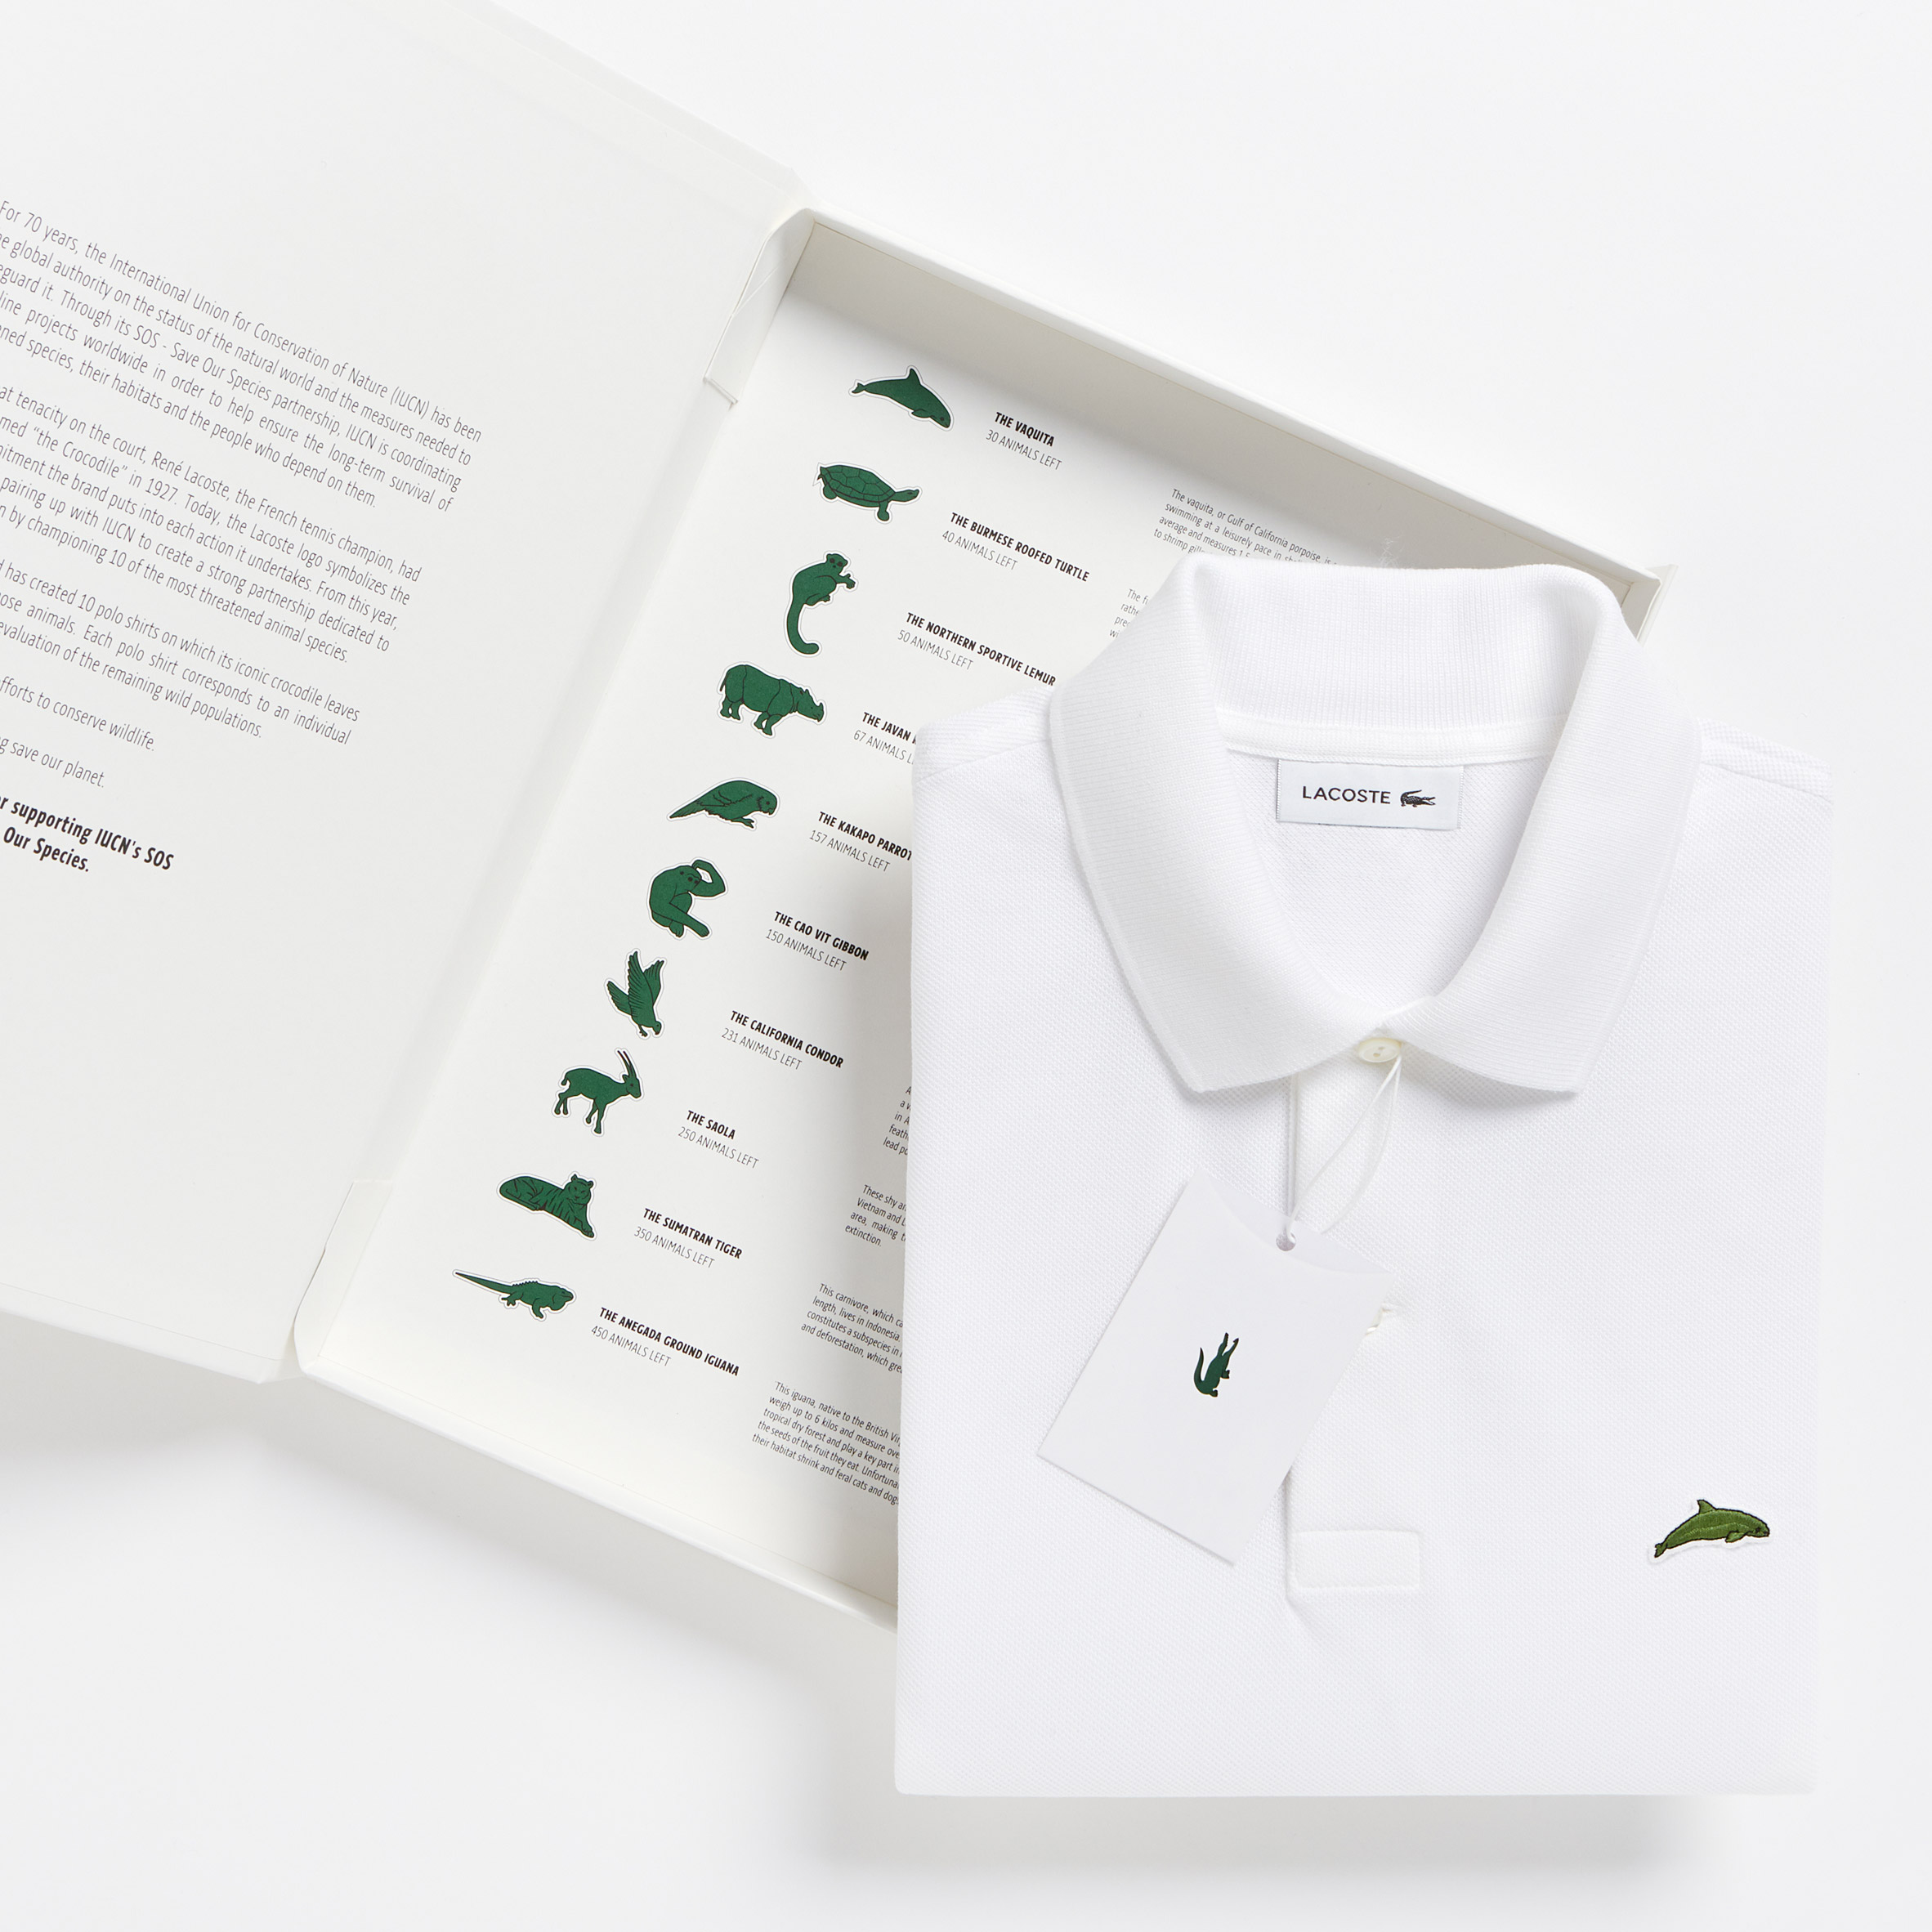 Lacoste crocodile logo replaced by endangered